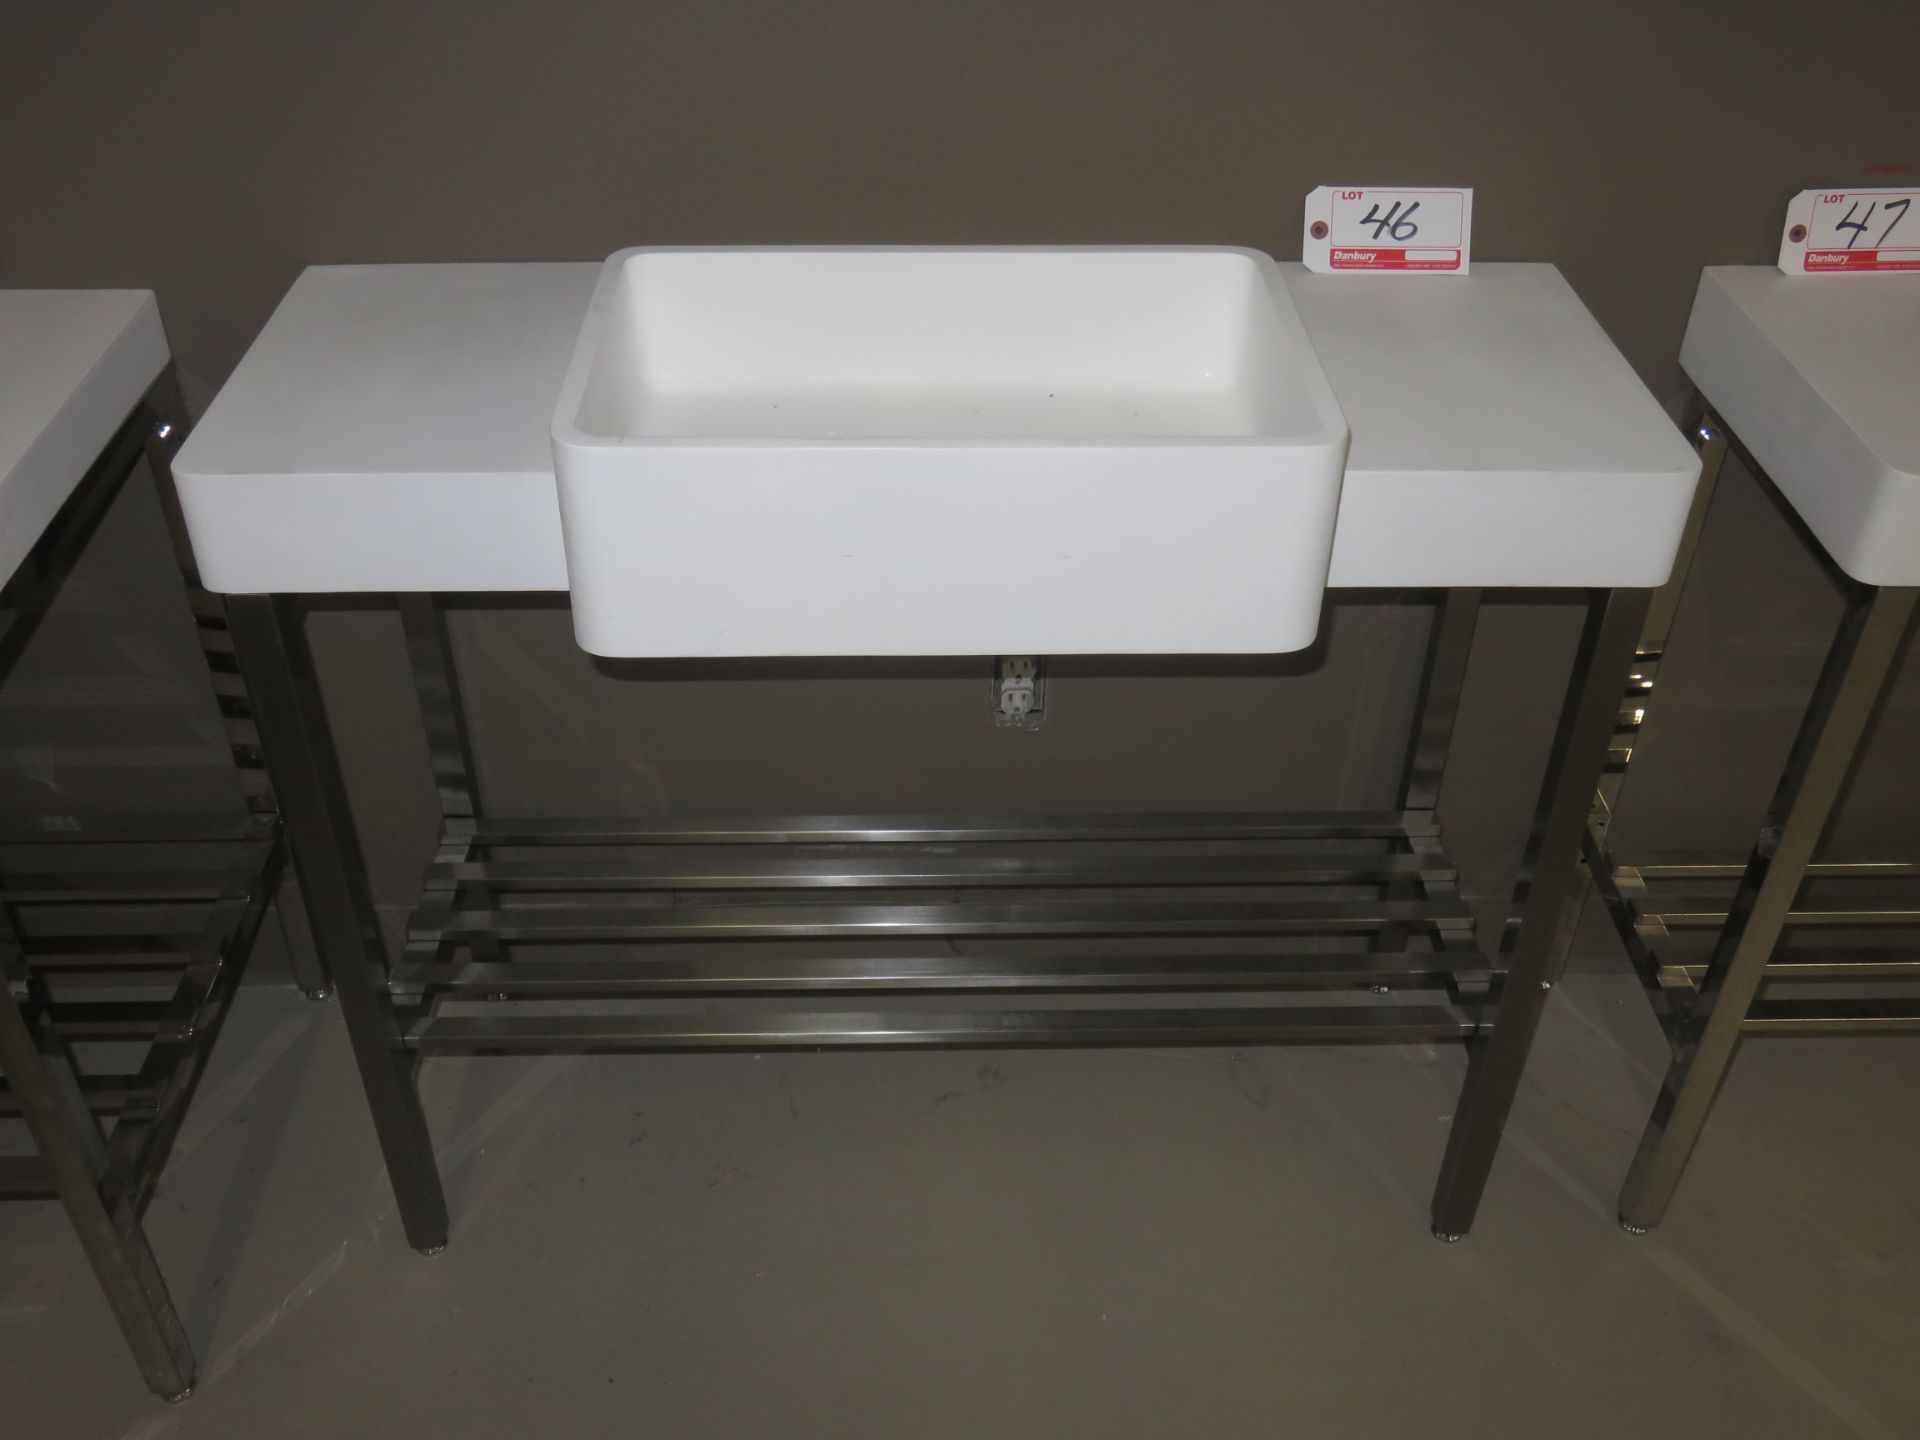 TOP BATH METRO WHITE COMPOSITE + BRUSHED S/S STAND 39.75"W X 17" SINGLE HOLE VANITY SINK